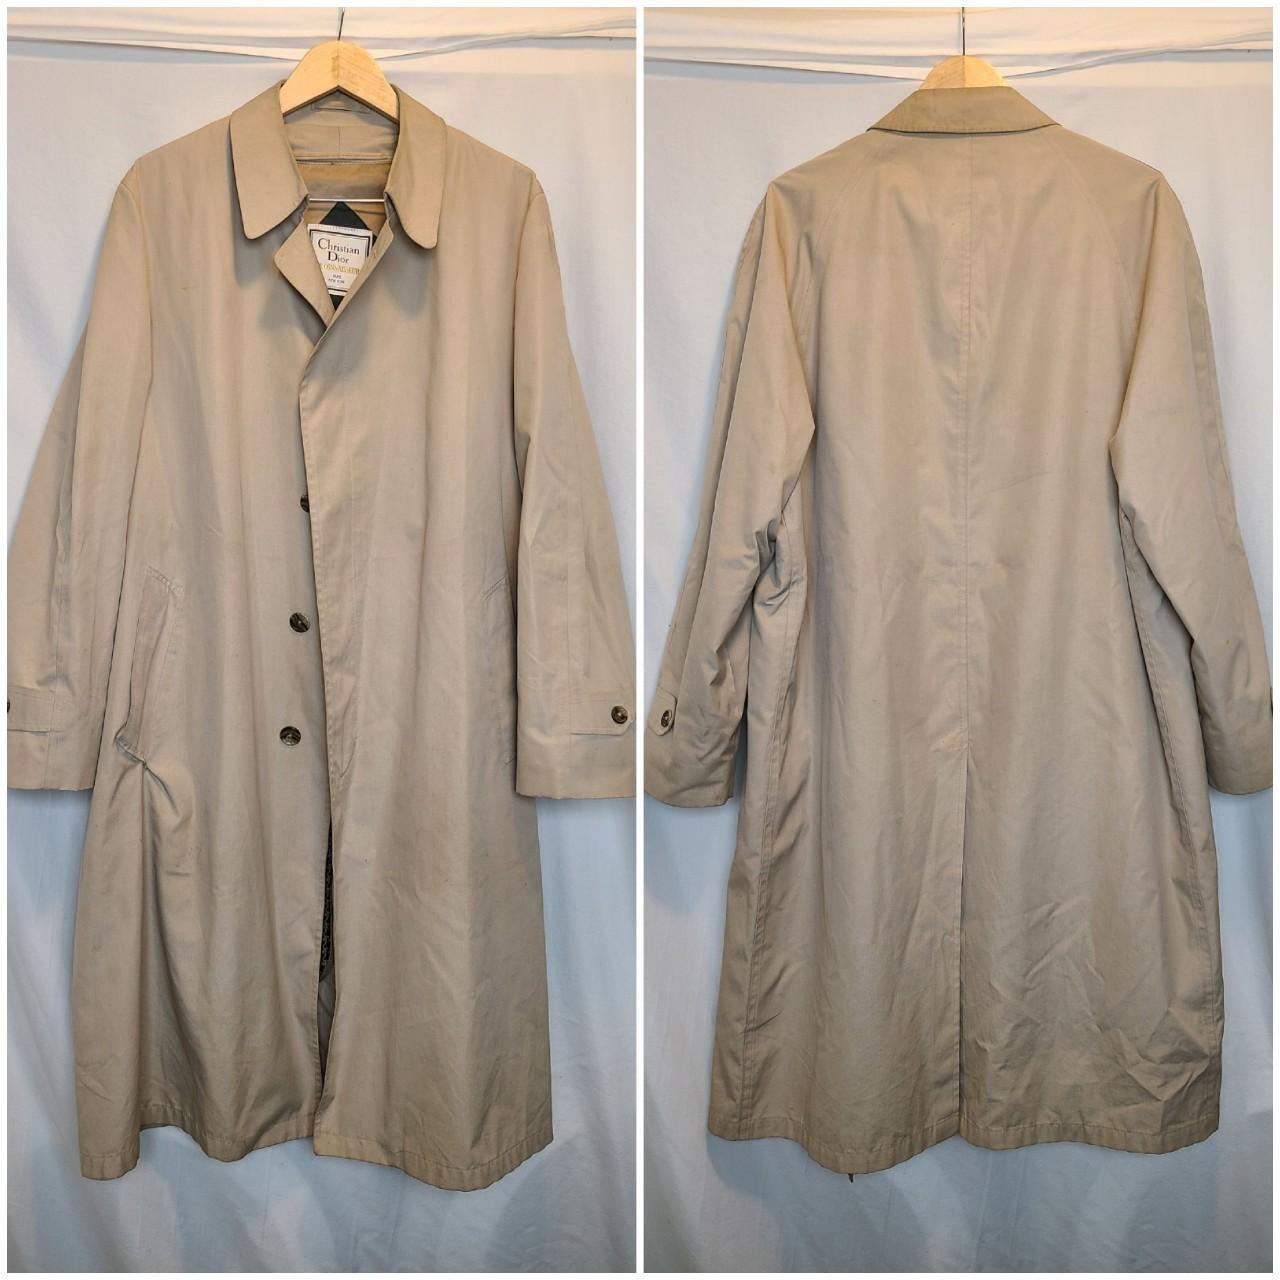 Product Image 2 - Vintage 80s trench coat by